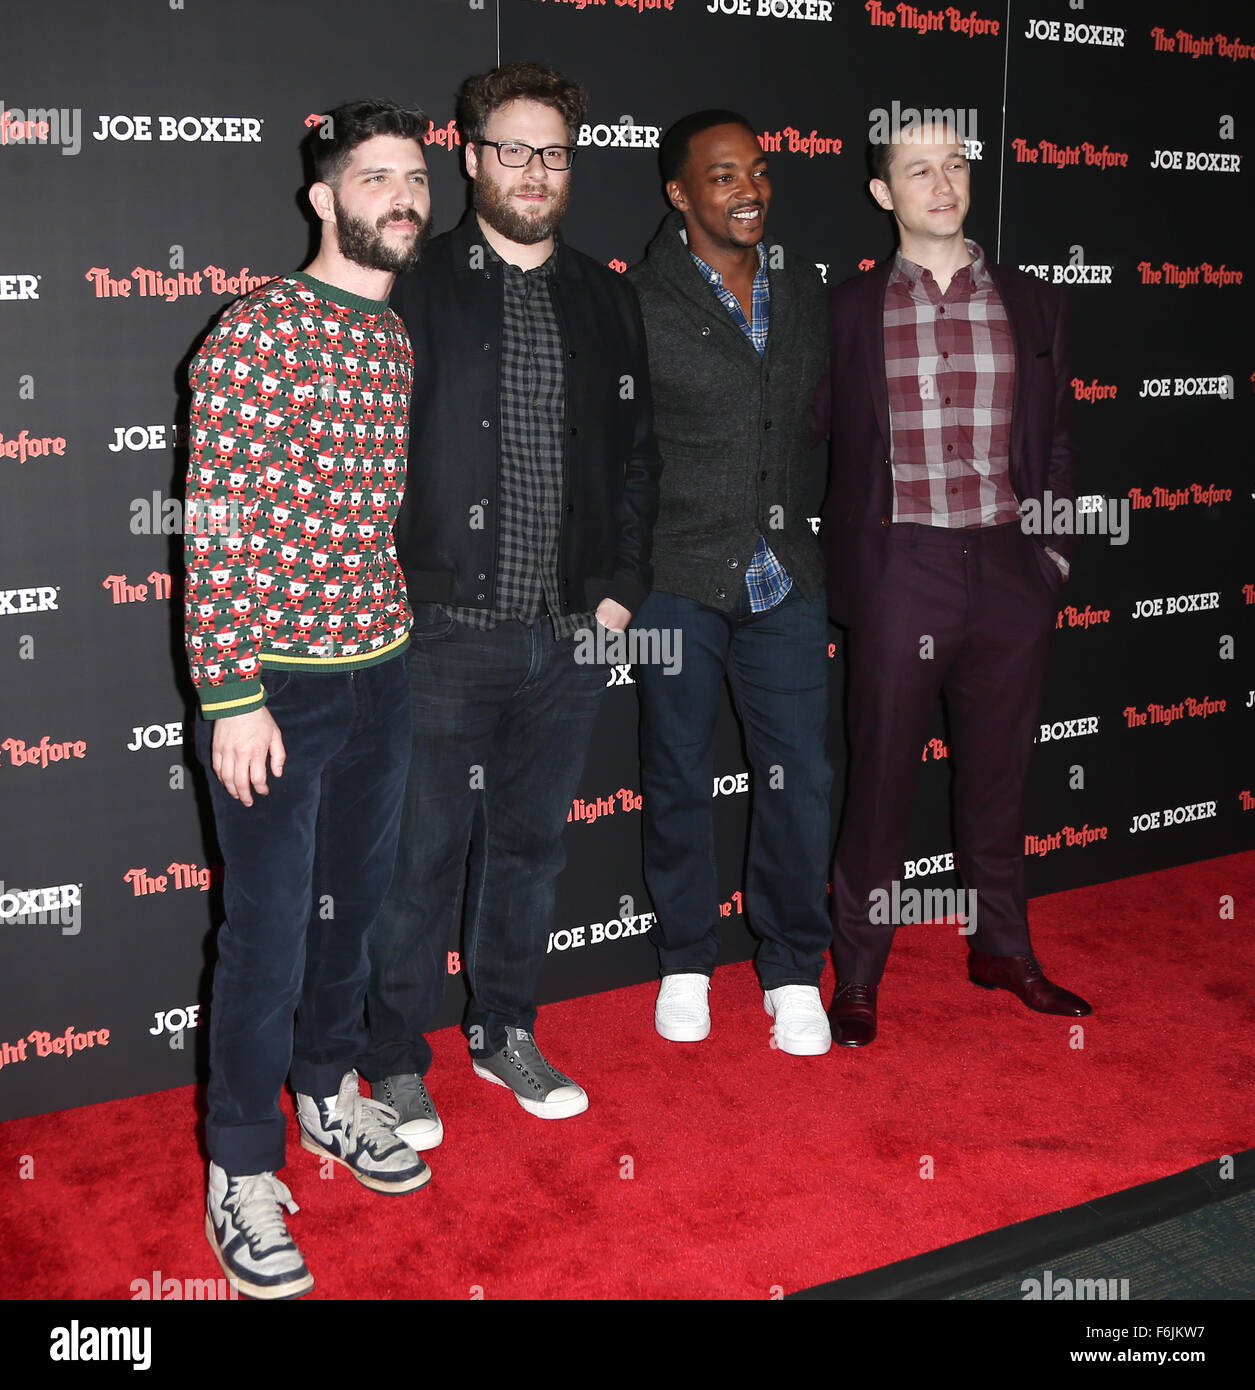 NEW YORK-NOV 16: (L-R) Director Jonathan Levine, actors Seth Rogen, Anthony Mackie and Joseph Gordon-Levitt attend the New York Red Carpet screening of Columbia Pictures' 'The Night Before' at the Landmark Sunshine Theater. Credit:  Debby Wong/Alamy Live News Stock Photo